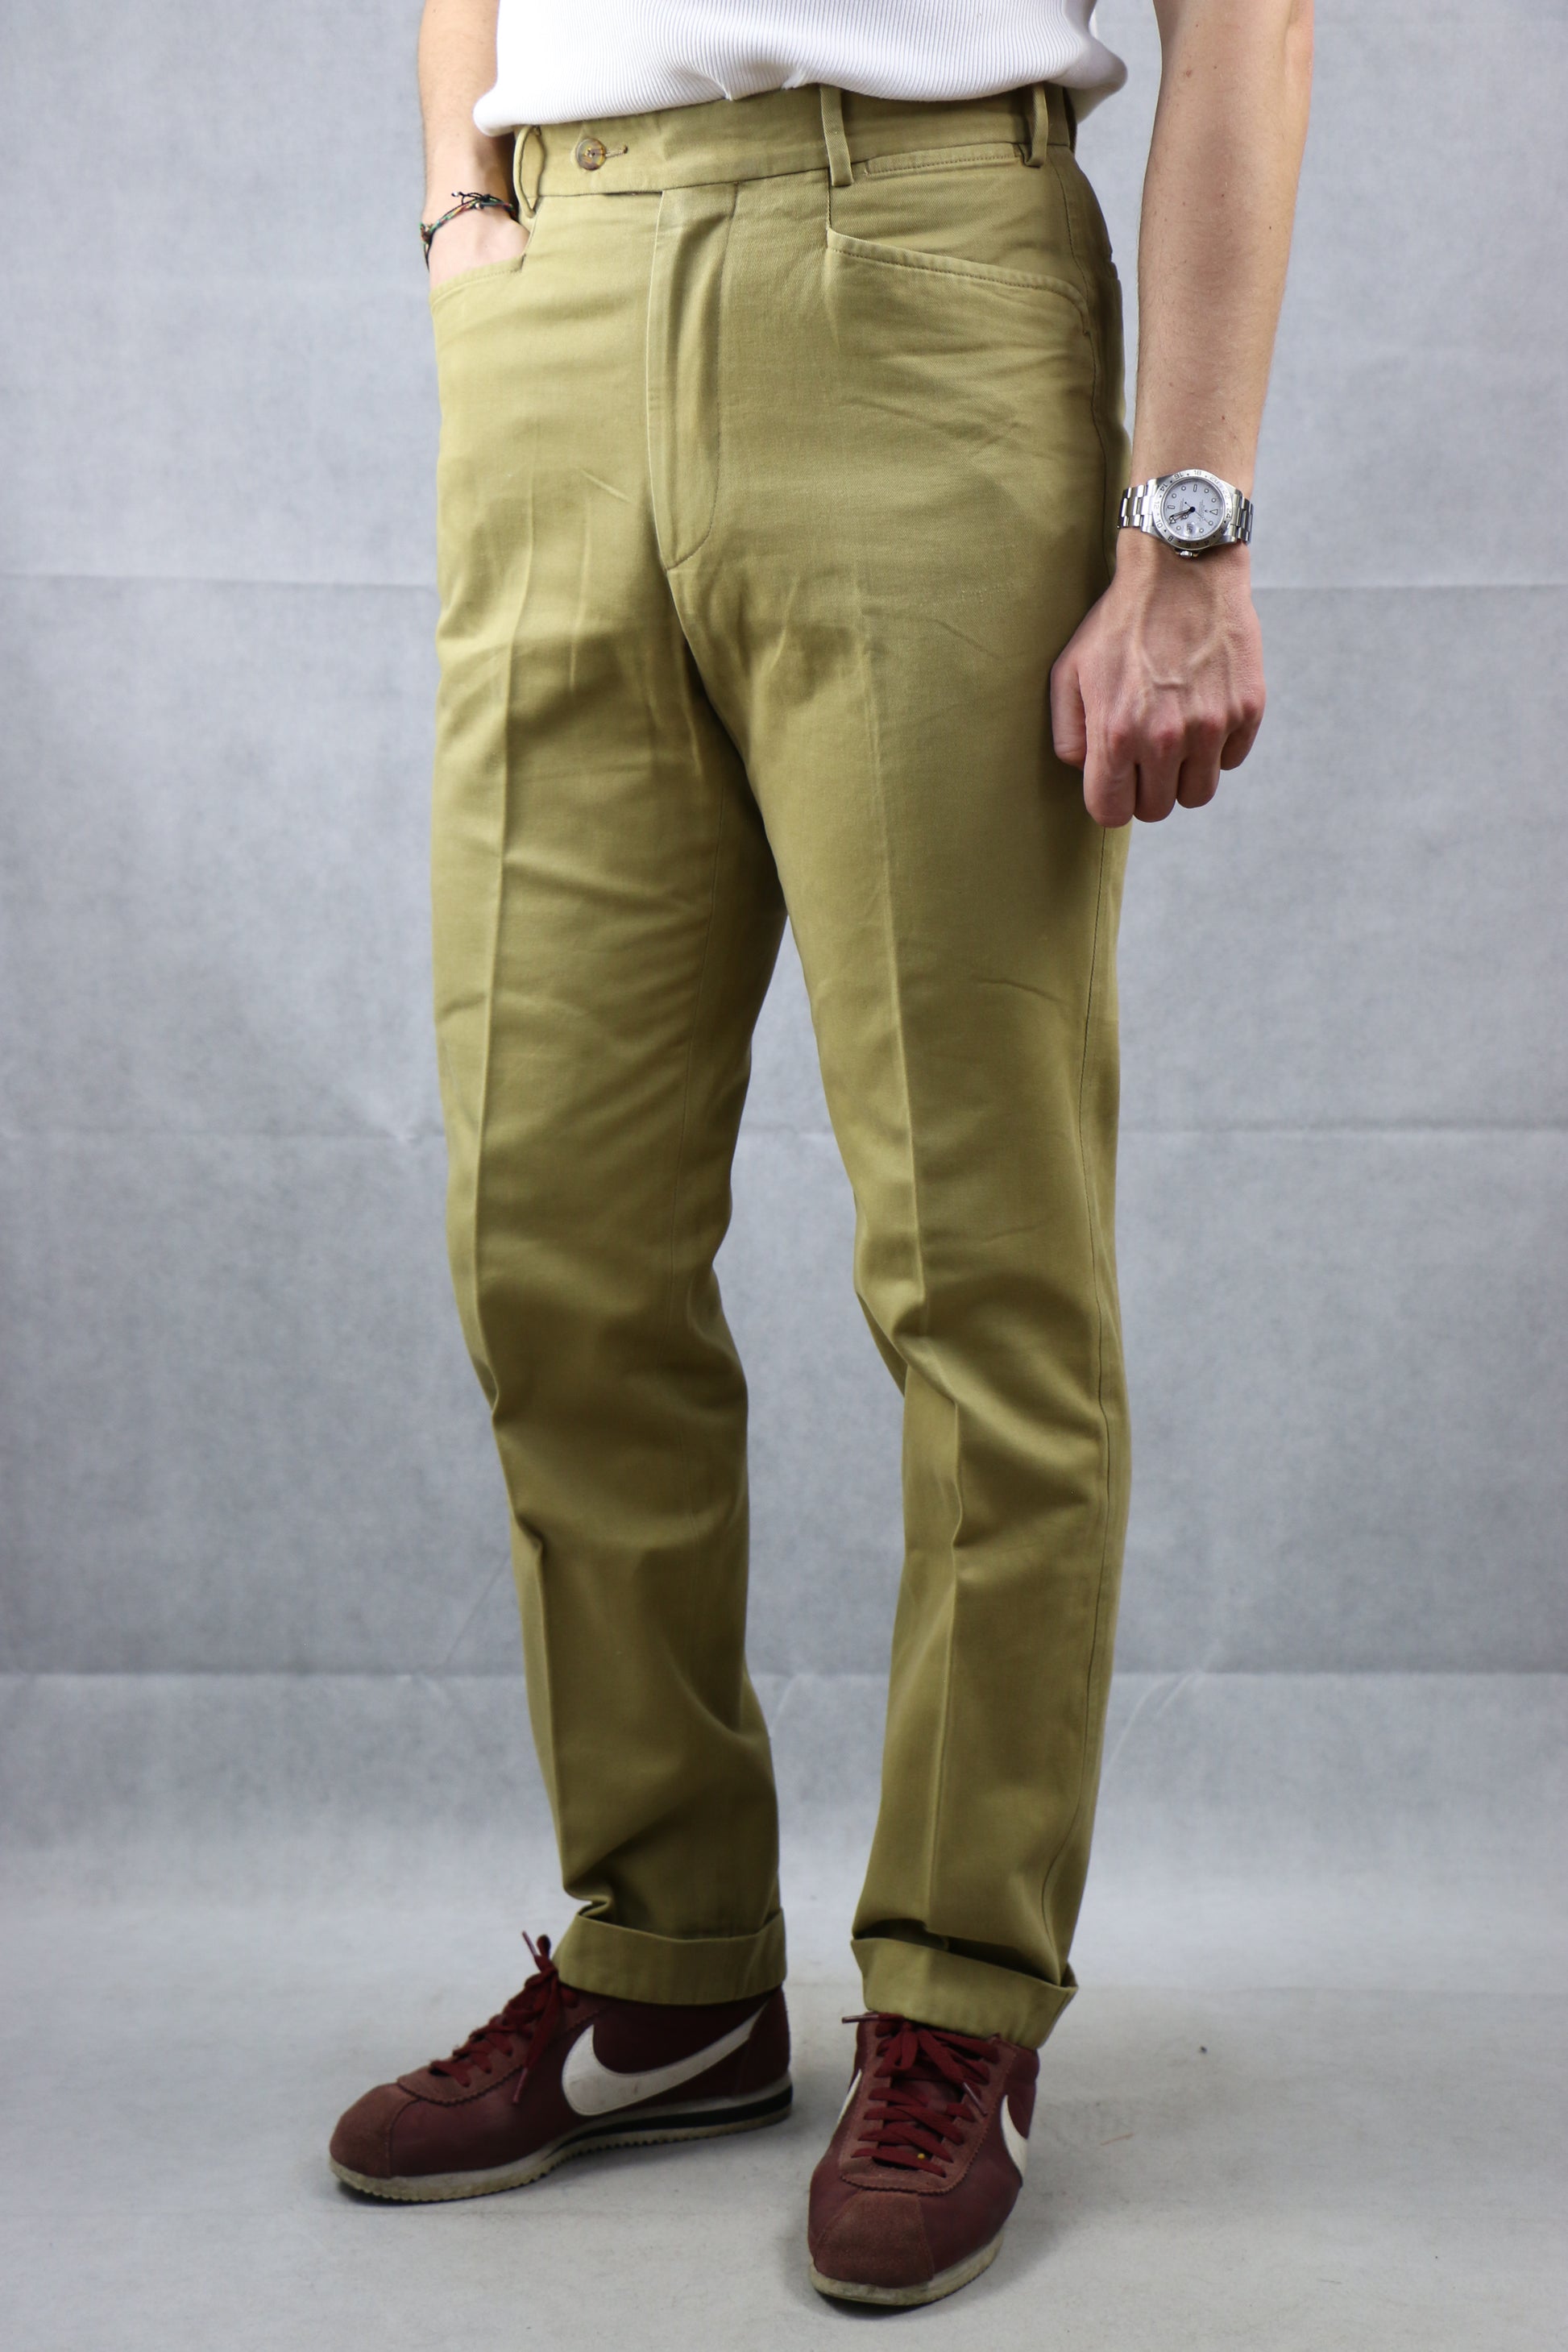 Burberry's Chino Trousers